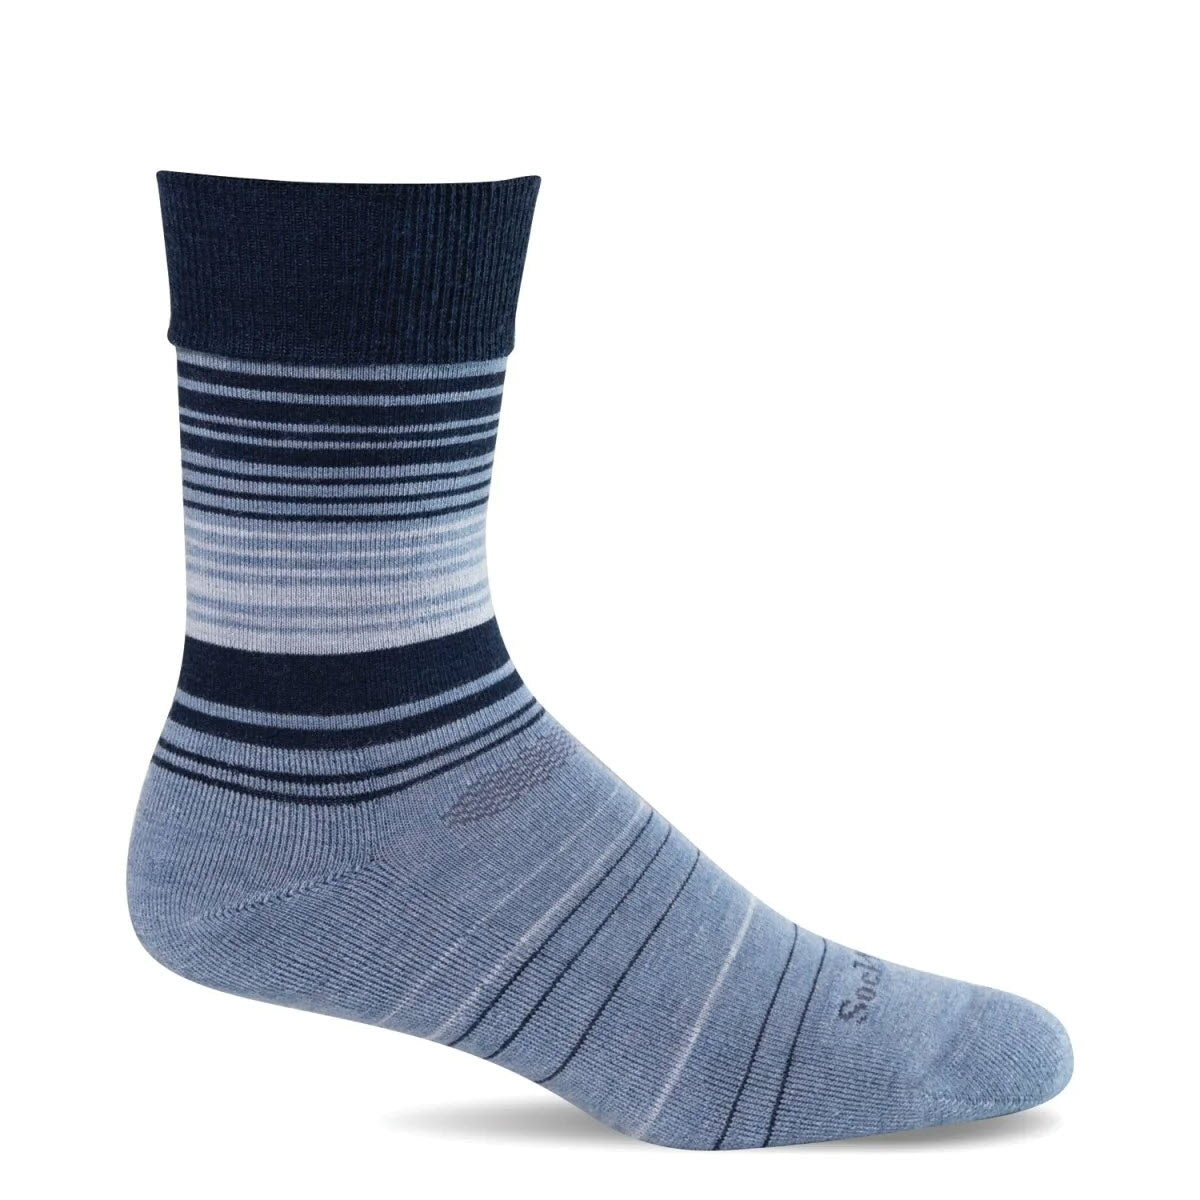 A single grey and navy striped Sockwell Easy Does It crew sock with a non-binding top against a white background.